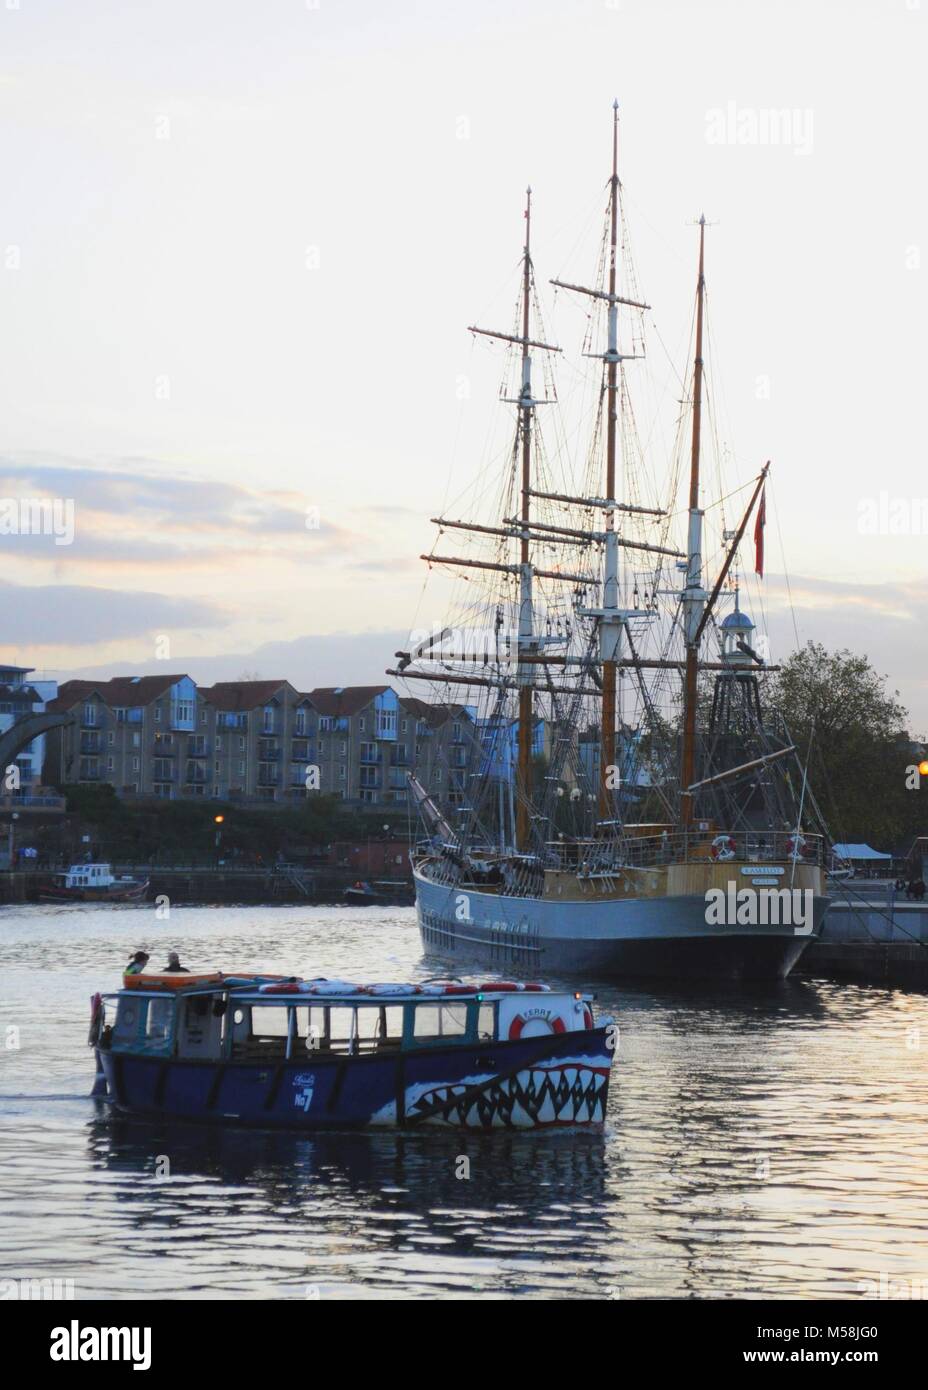 Harbour ferry 'No 7' passing barque 'Kaskelot', built by J. Ring-Andersen in 1948, moored at Hannover Quay, Bristol Harbour, UK. Stock Photo